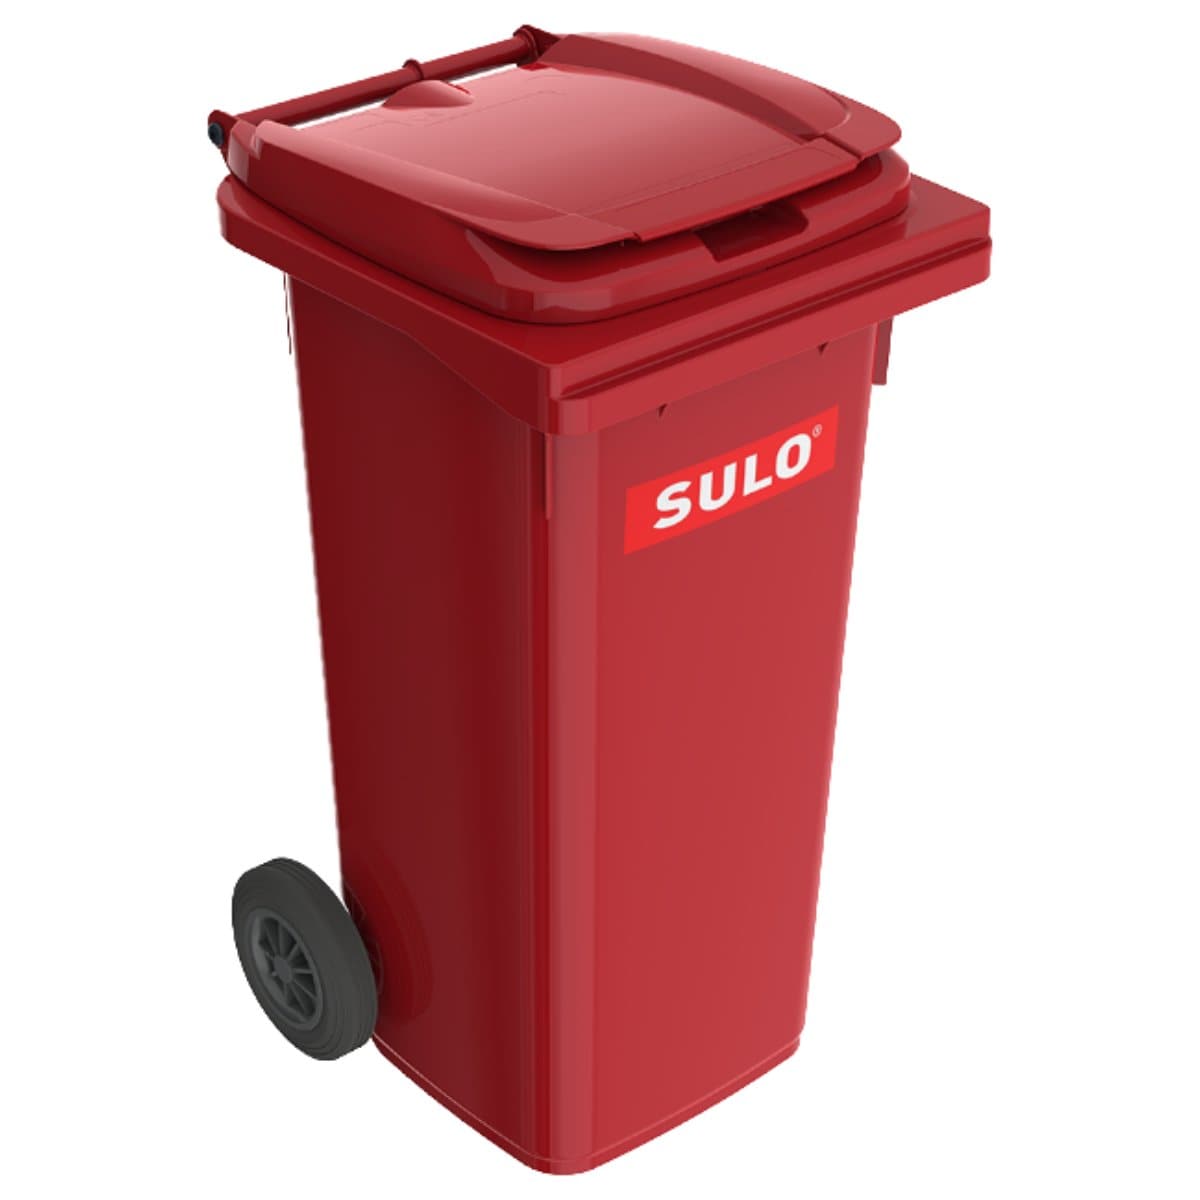 SULO Mobile Garbage Bin, 120 litres, Red